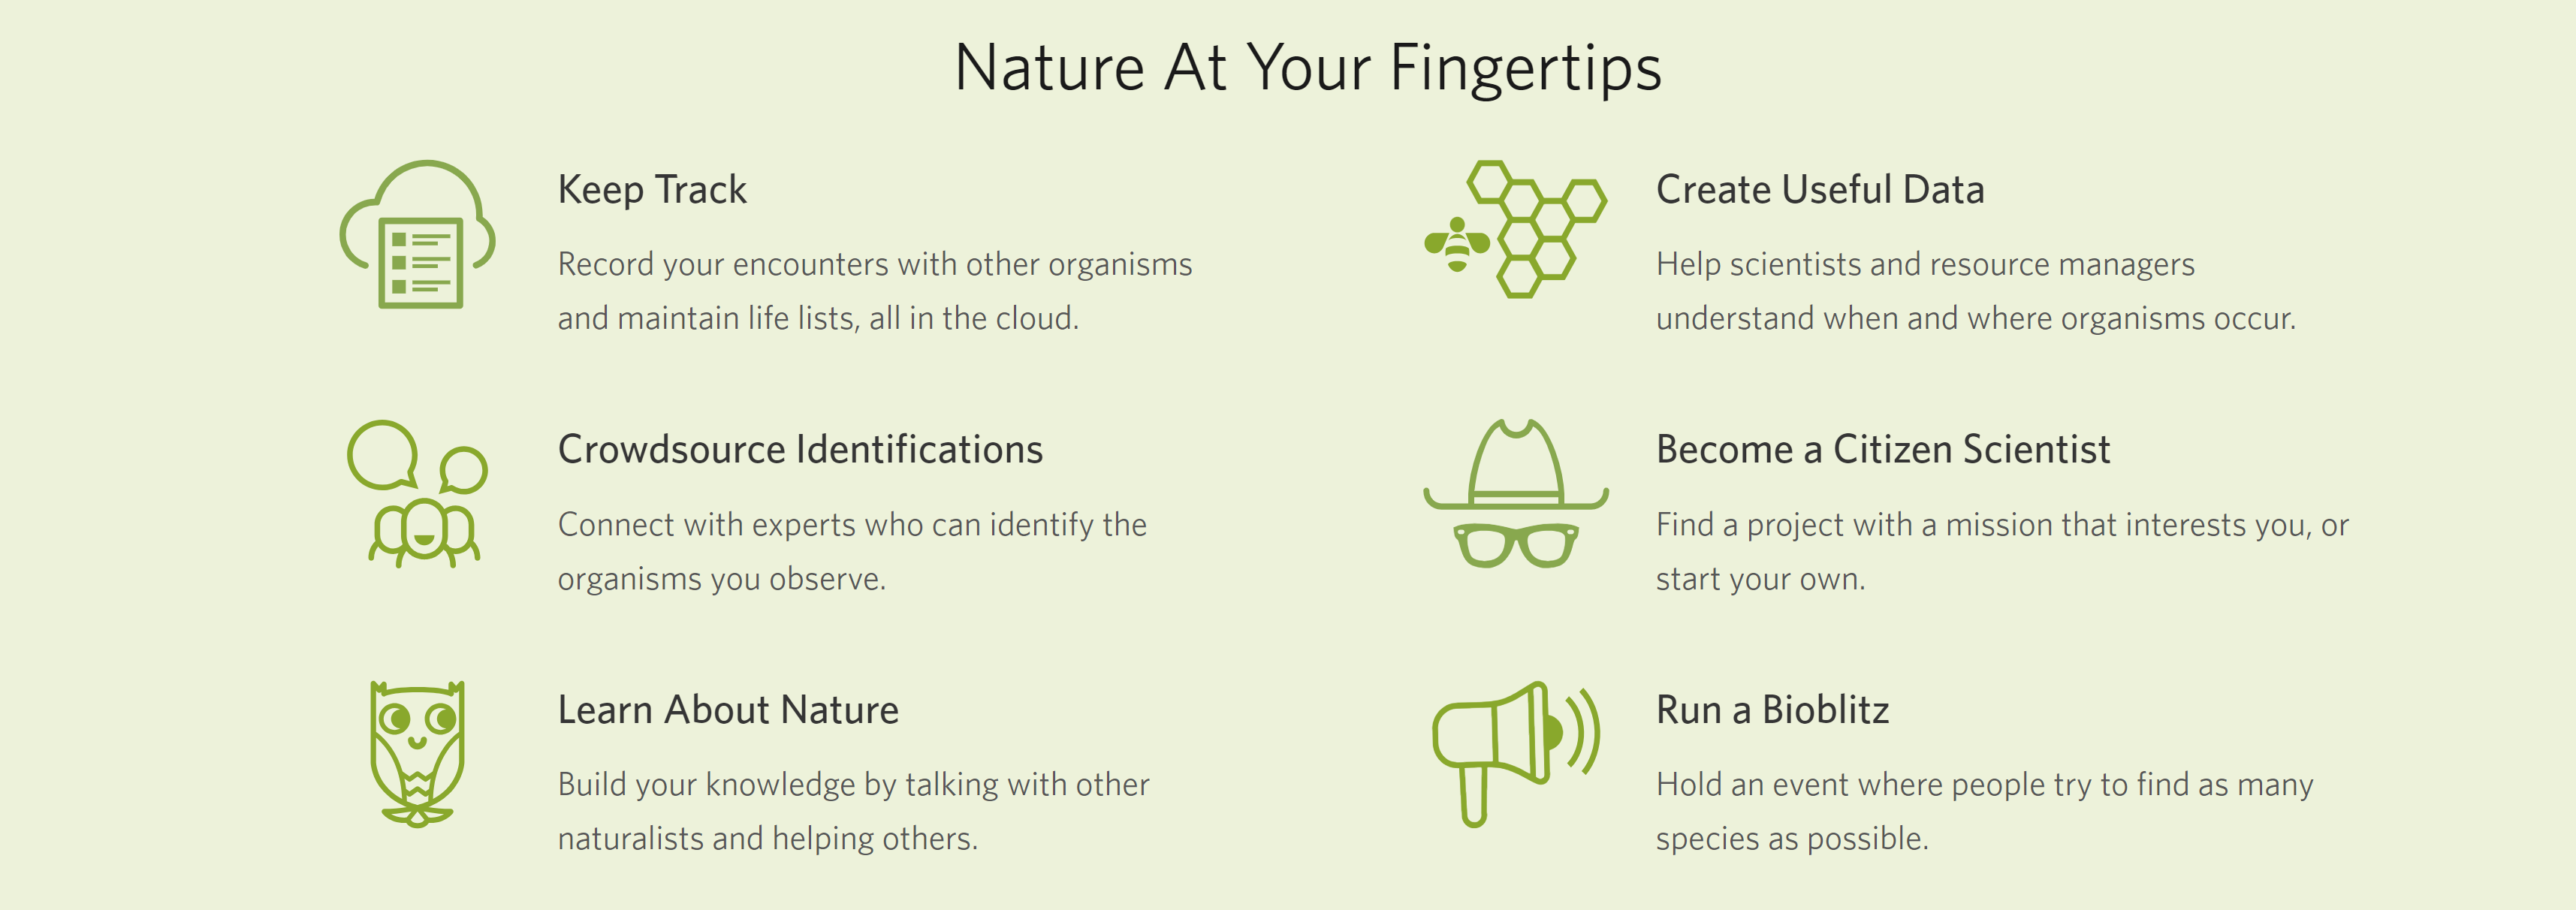 iNaturalist.org home page screenshot.svg.png